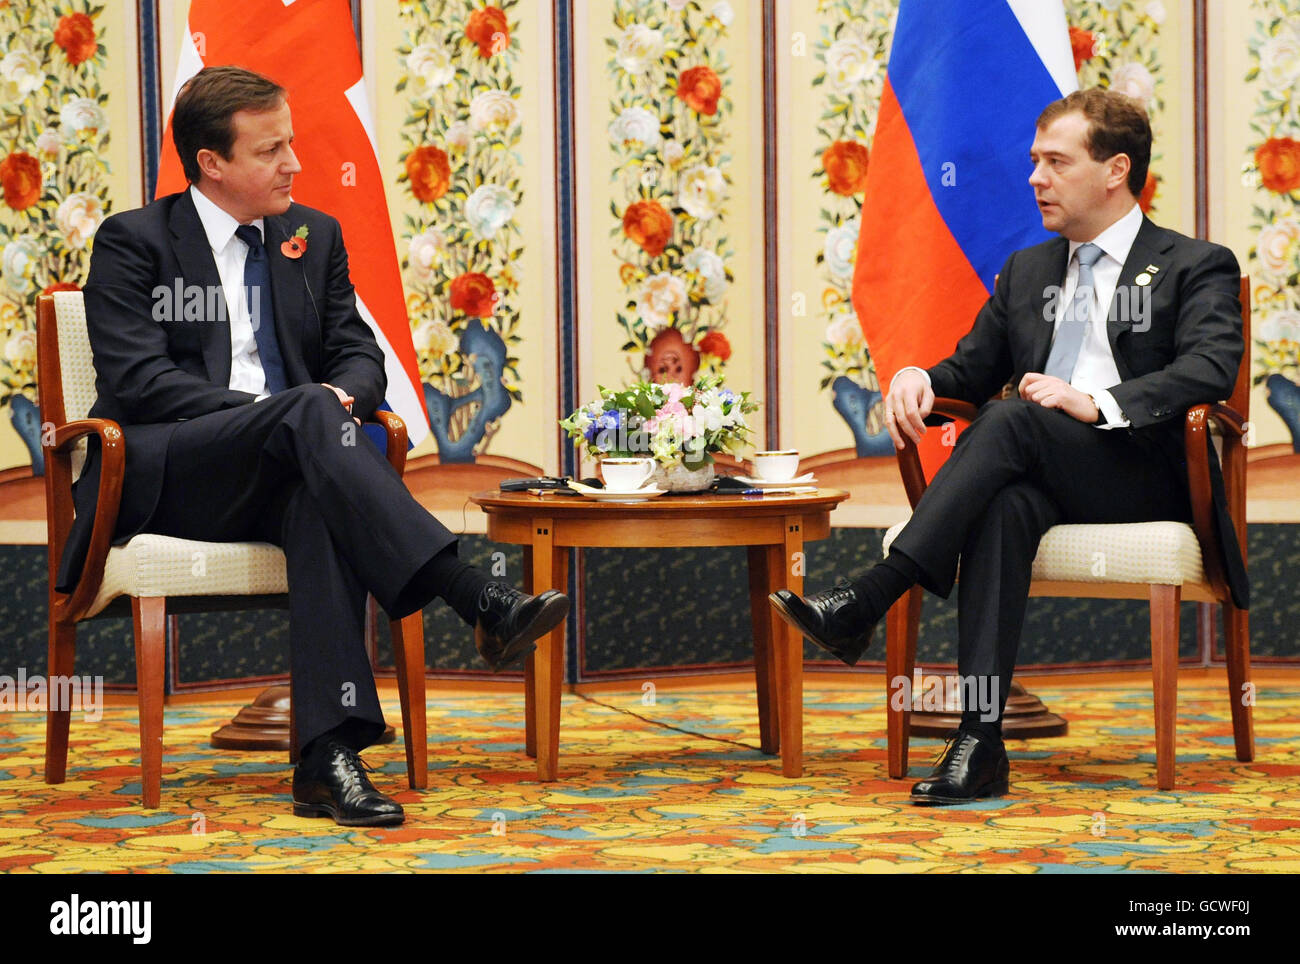 Prime Minister David Cameron holds a meeting with Russian President Dmitry Medvedev before the start of the G20 Summit in Seoul. Stock Photo